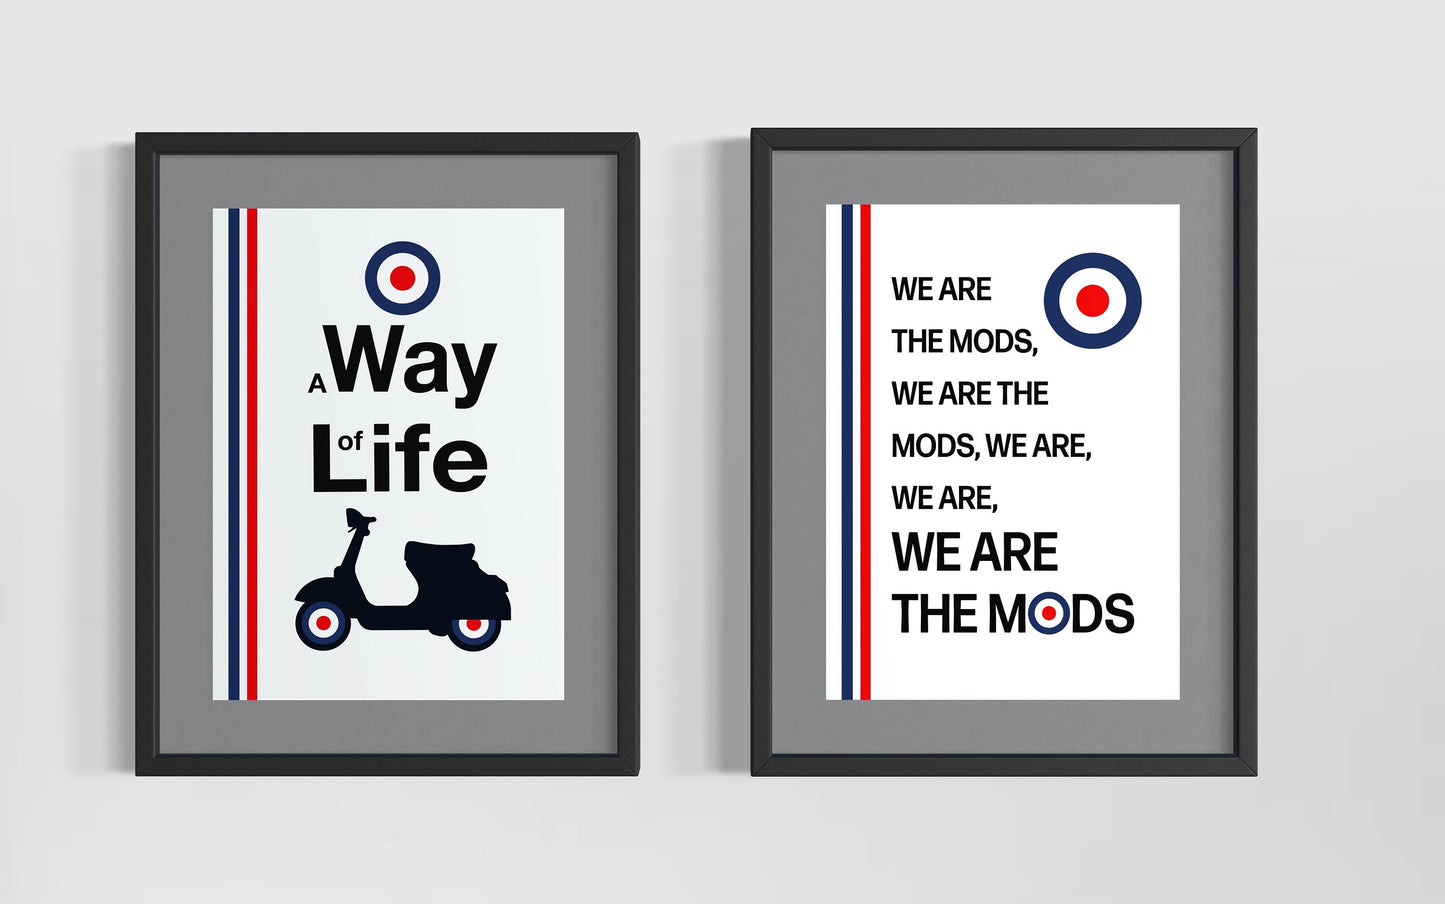 Set of Two Mod Culture Inspired Art Print Posters, Three Colour Options